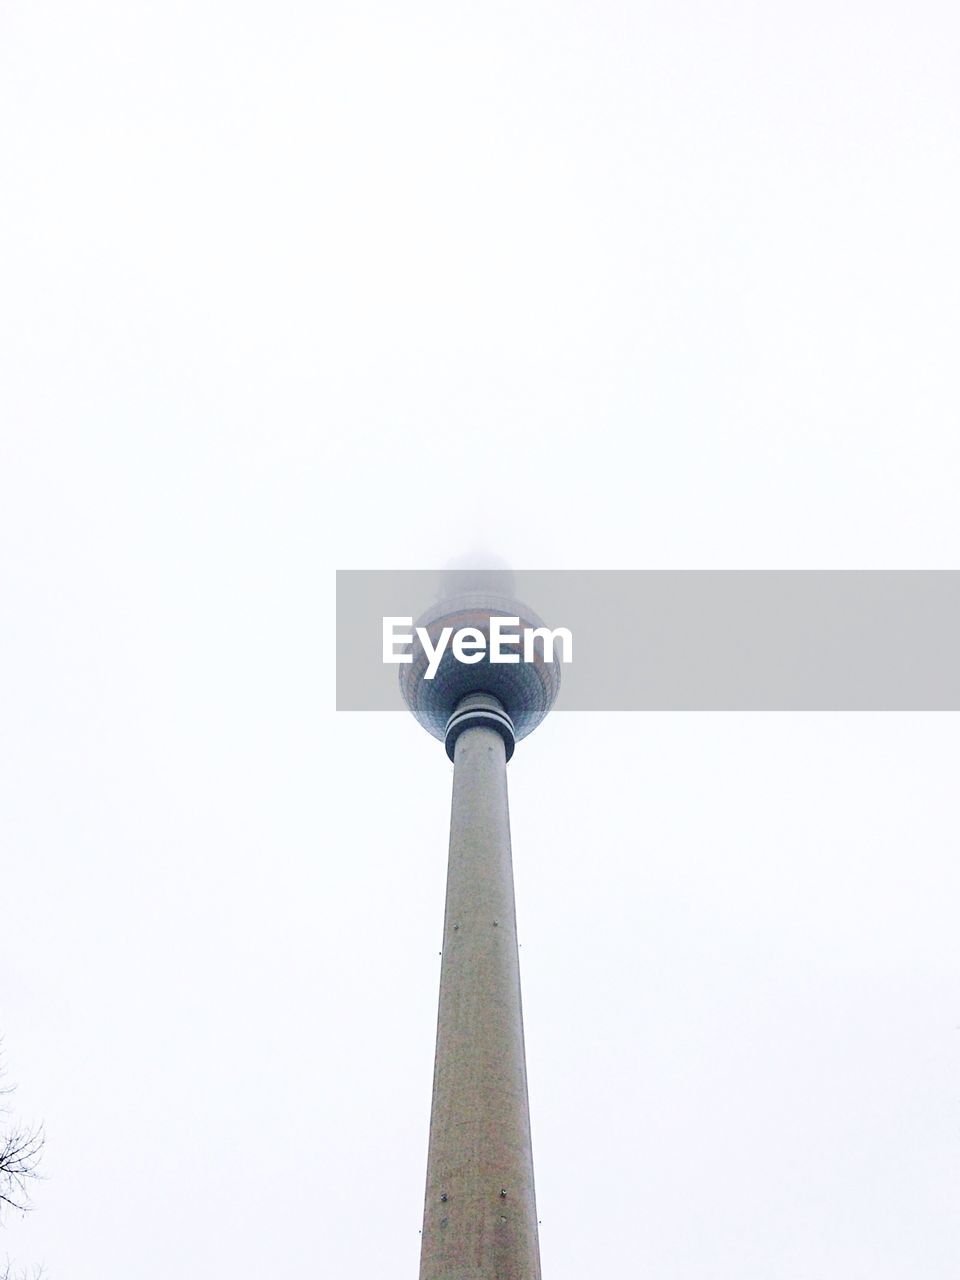 tower, communications tower, architecture, built structure, travel destinations, sky, building exterior, city, communication, travel, tourism, broadcasting, low angle view, no people, technology, global communications, nature, clear sky, building, lighting, copy space, outdoors, spire, day, sphere, television industry, street light